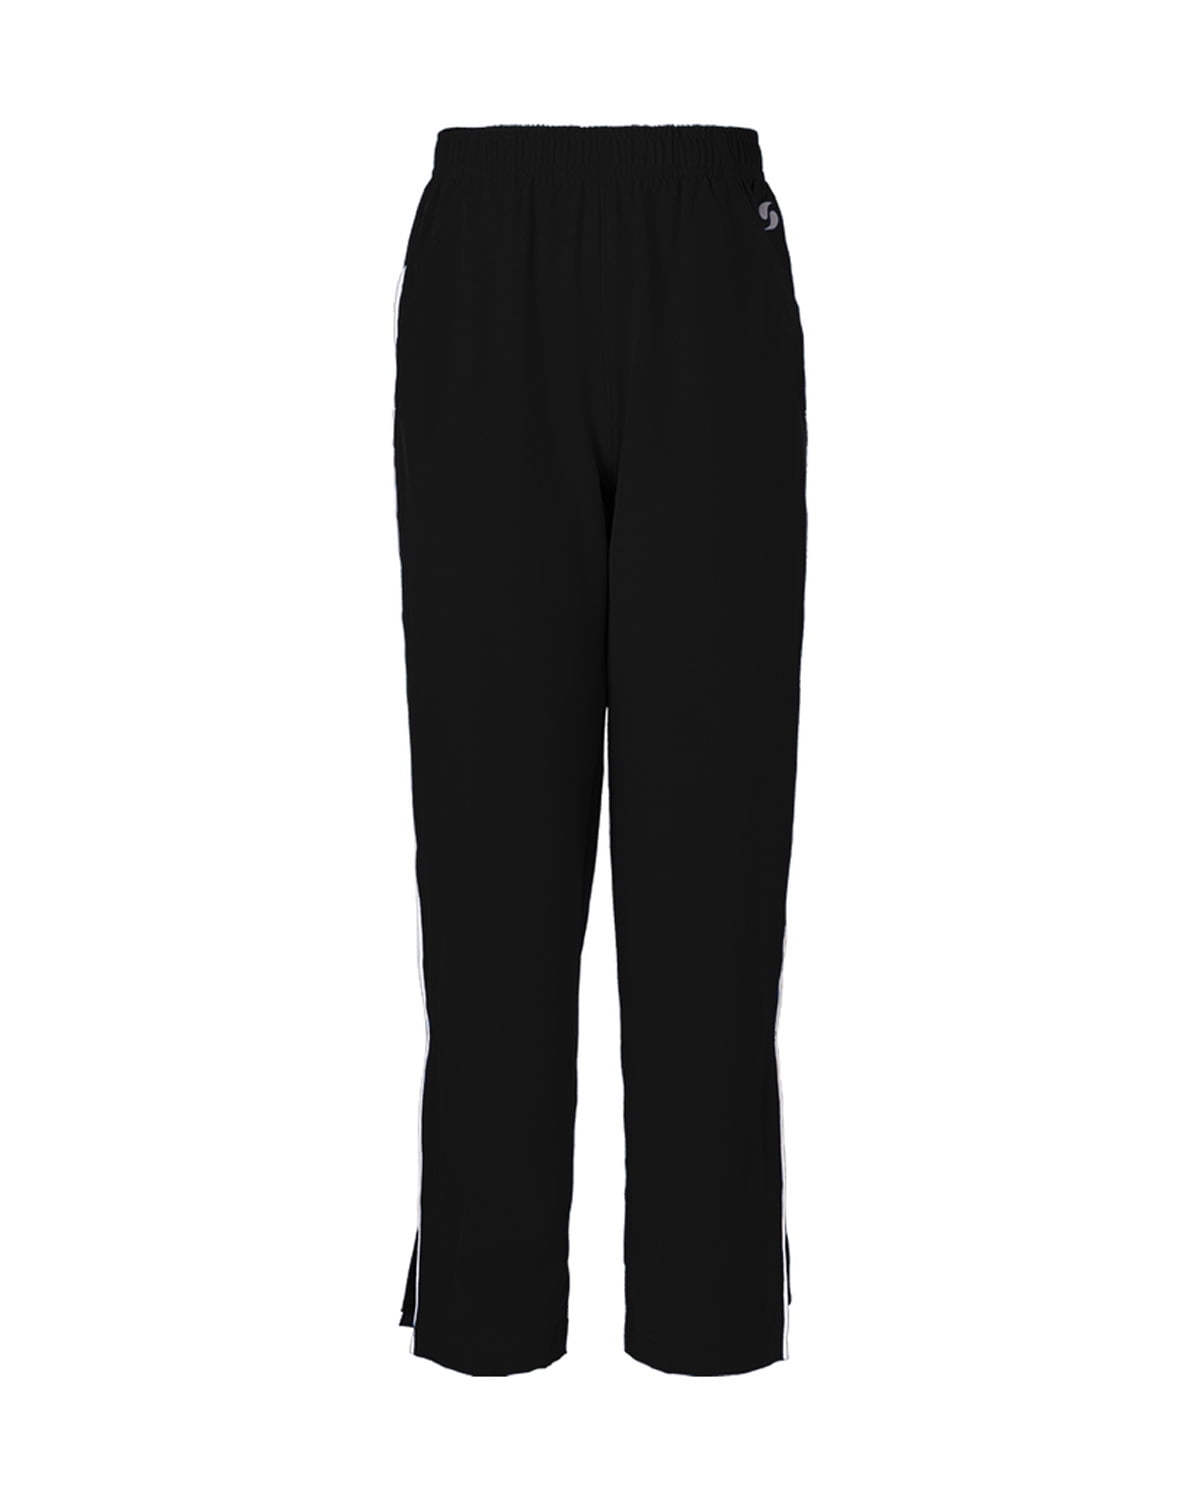 Soffe Youth Game Time Warm Up Pant - Walmart.com